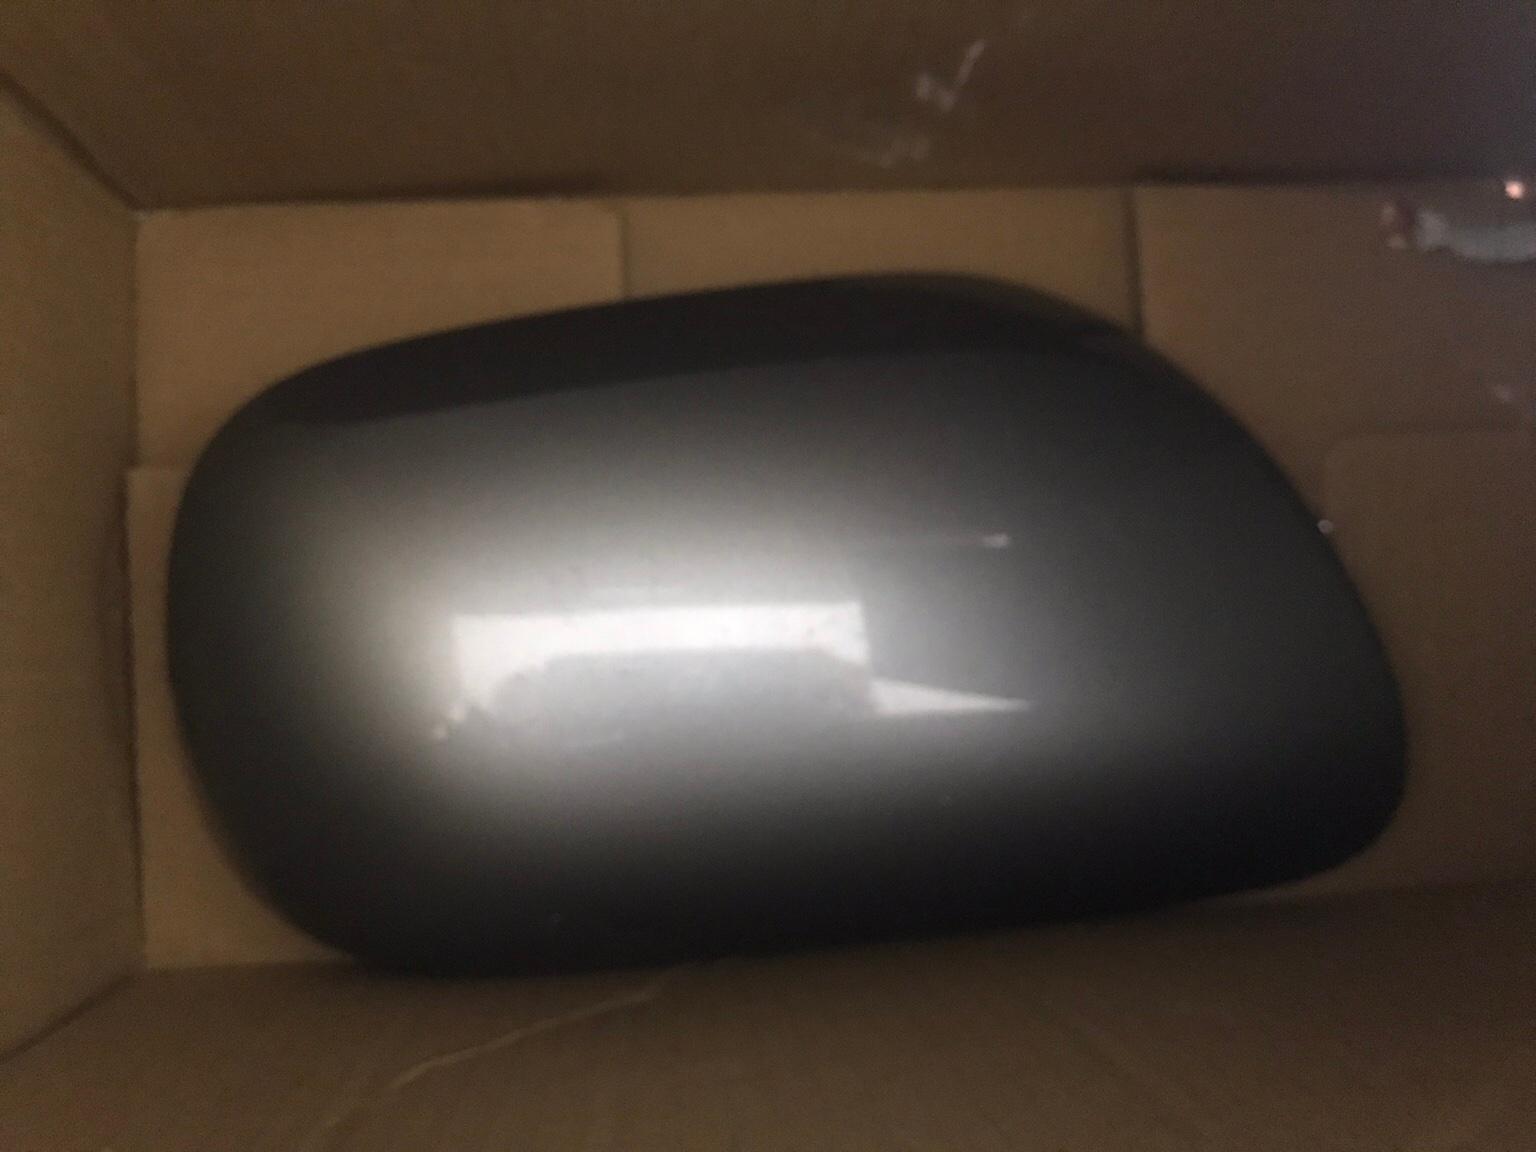 Toyota Yaris wing mirror case cover x2 in RM6 Redbridge for £20.00 for